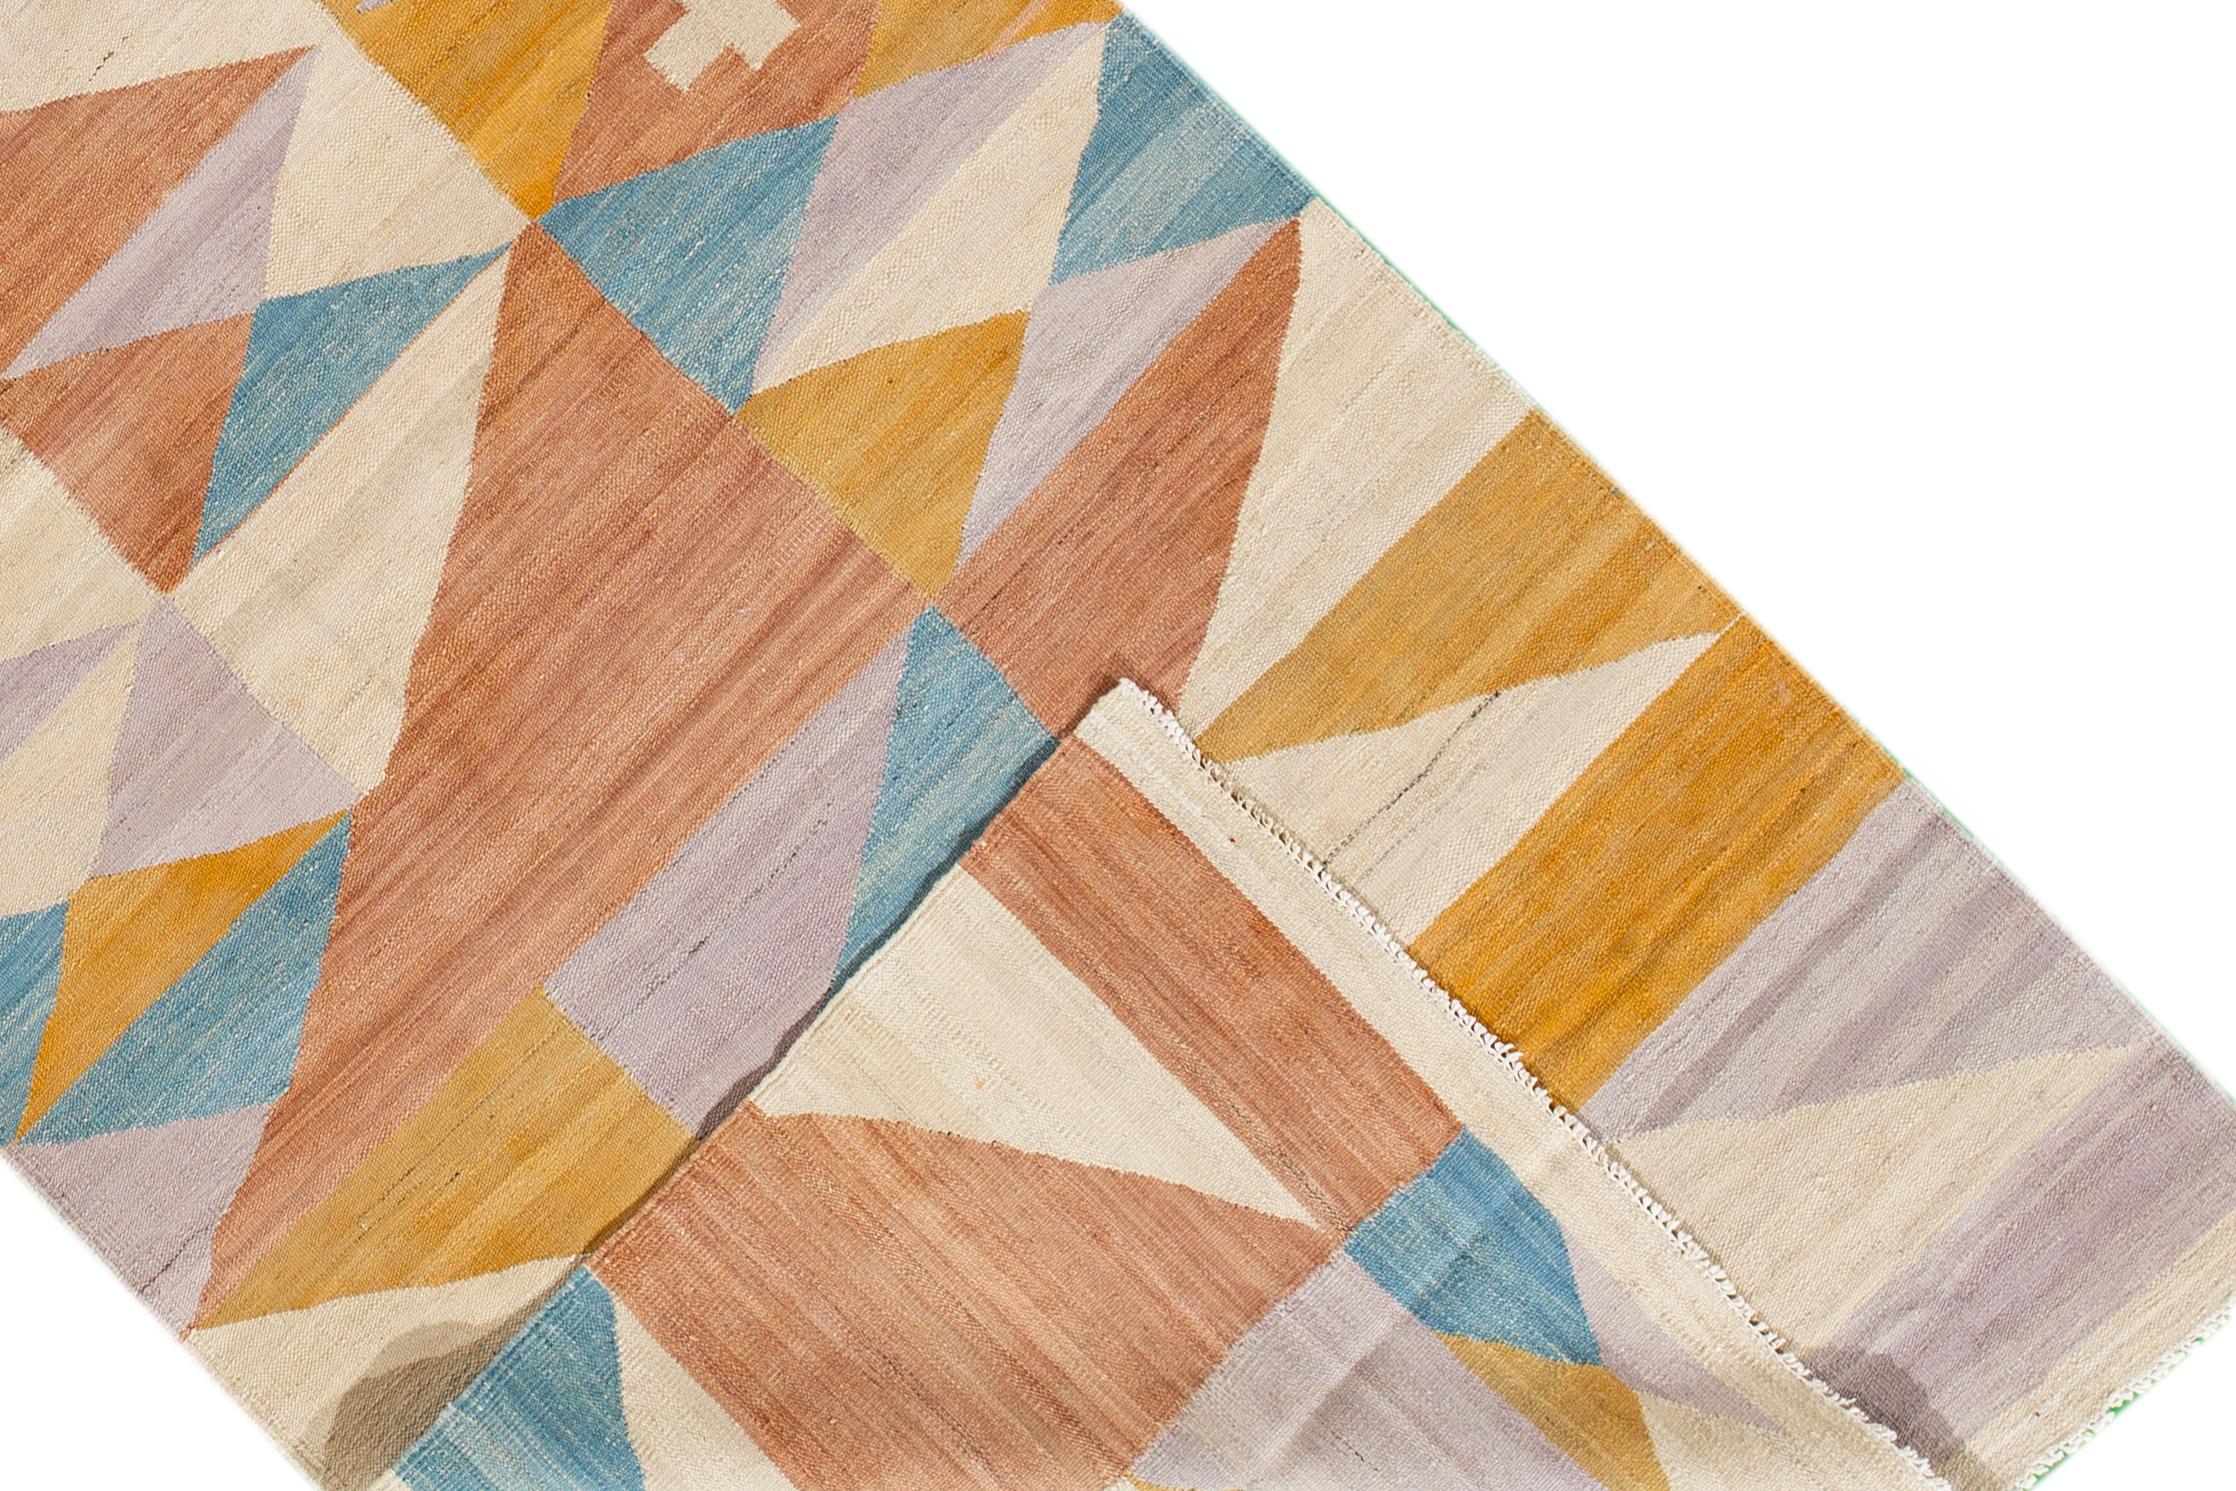 A hand-knotted modern Kilim rug with a geometric design. This rug measures 3'5